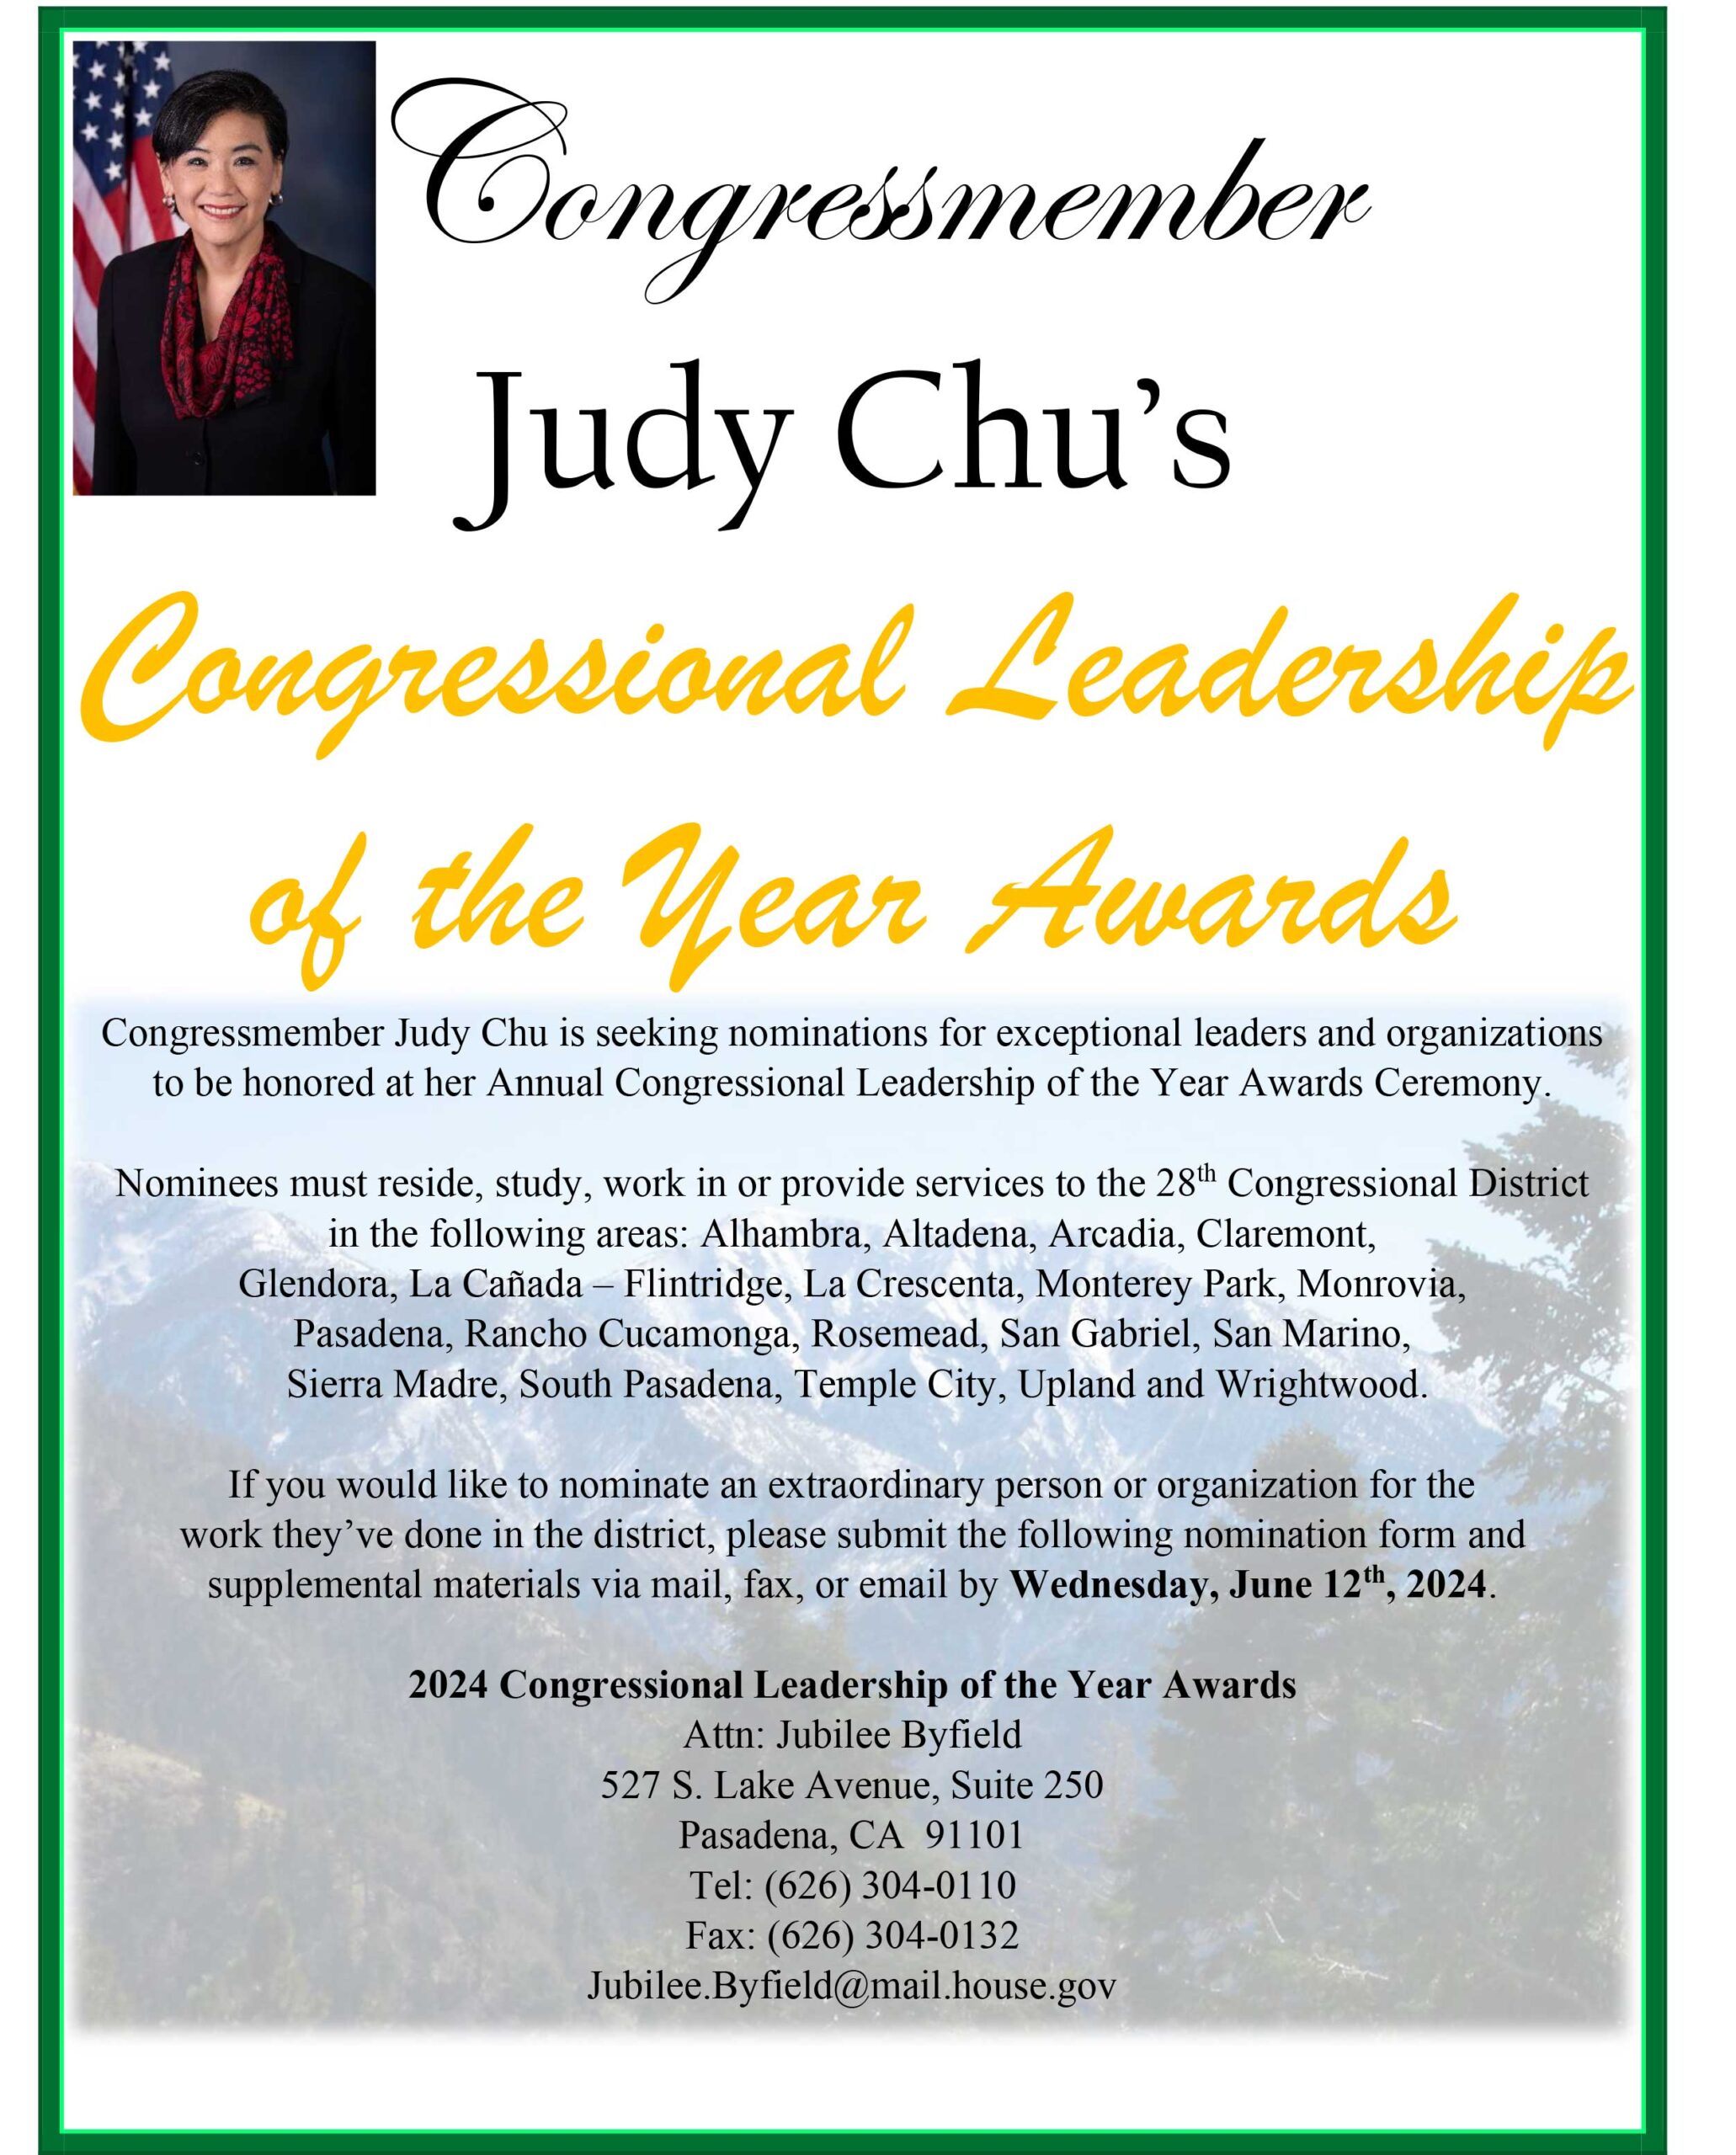 Annual Congressional Leadership Awards Ceremony announcement flyer for Congresswoman Judy Chu